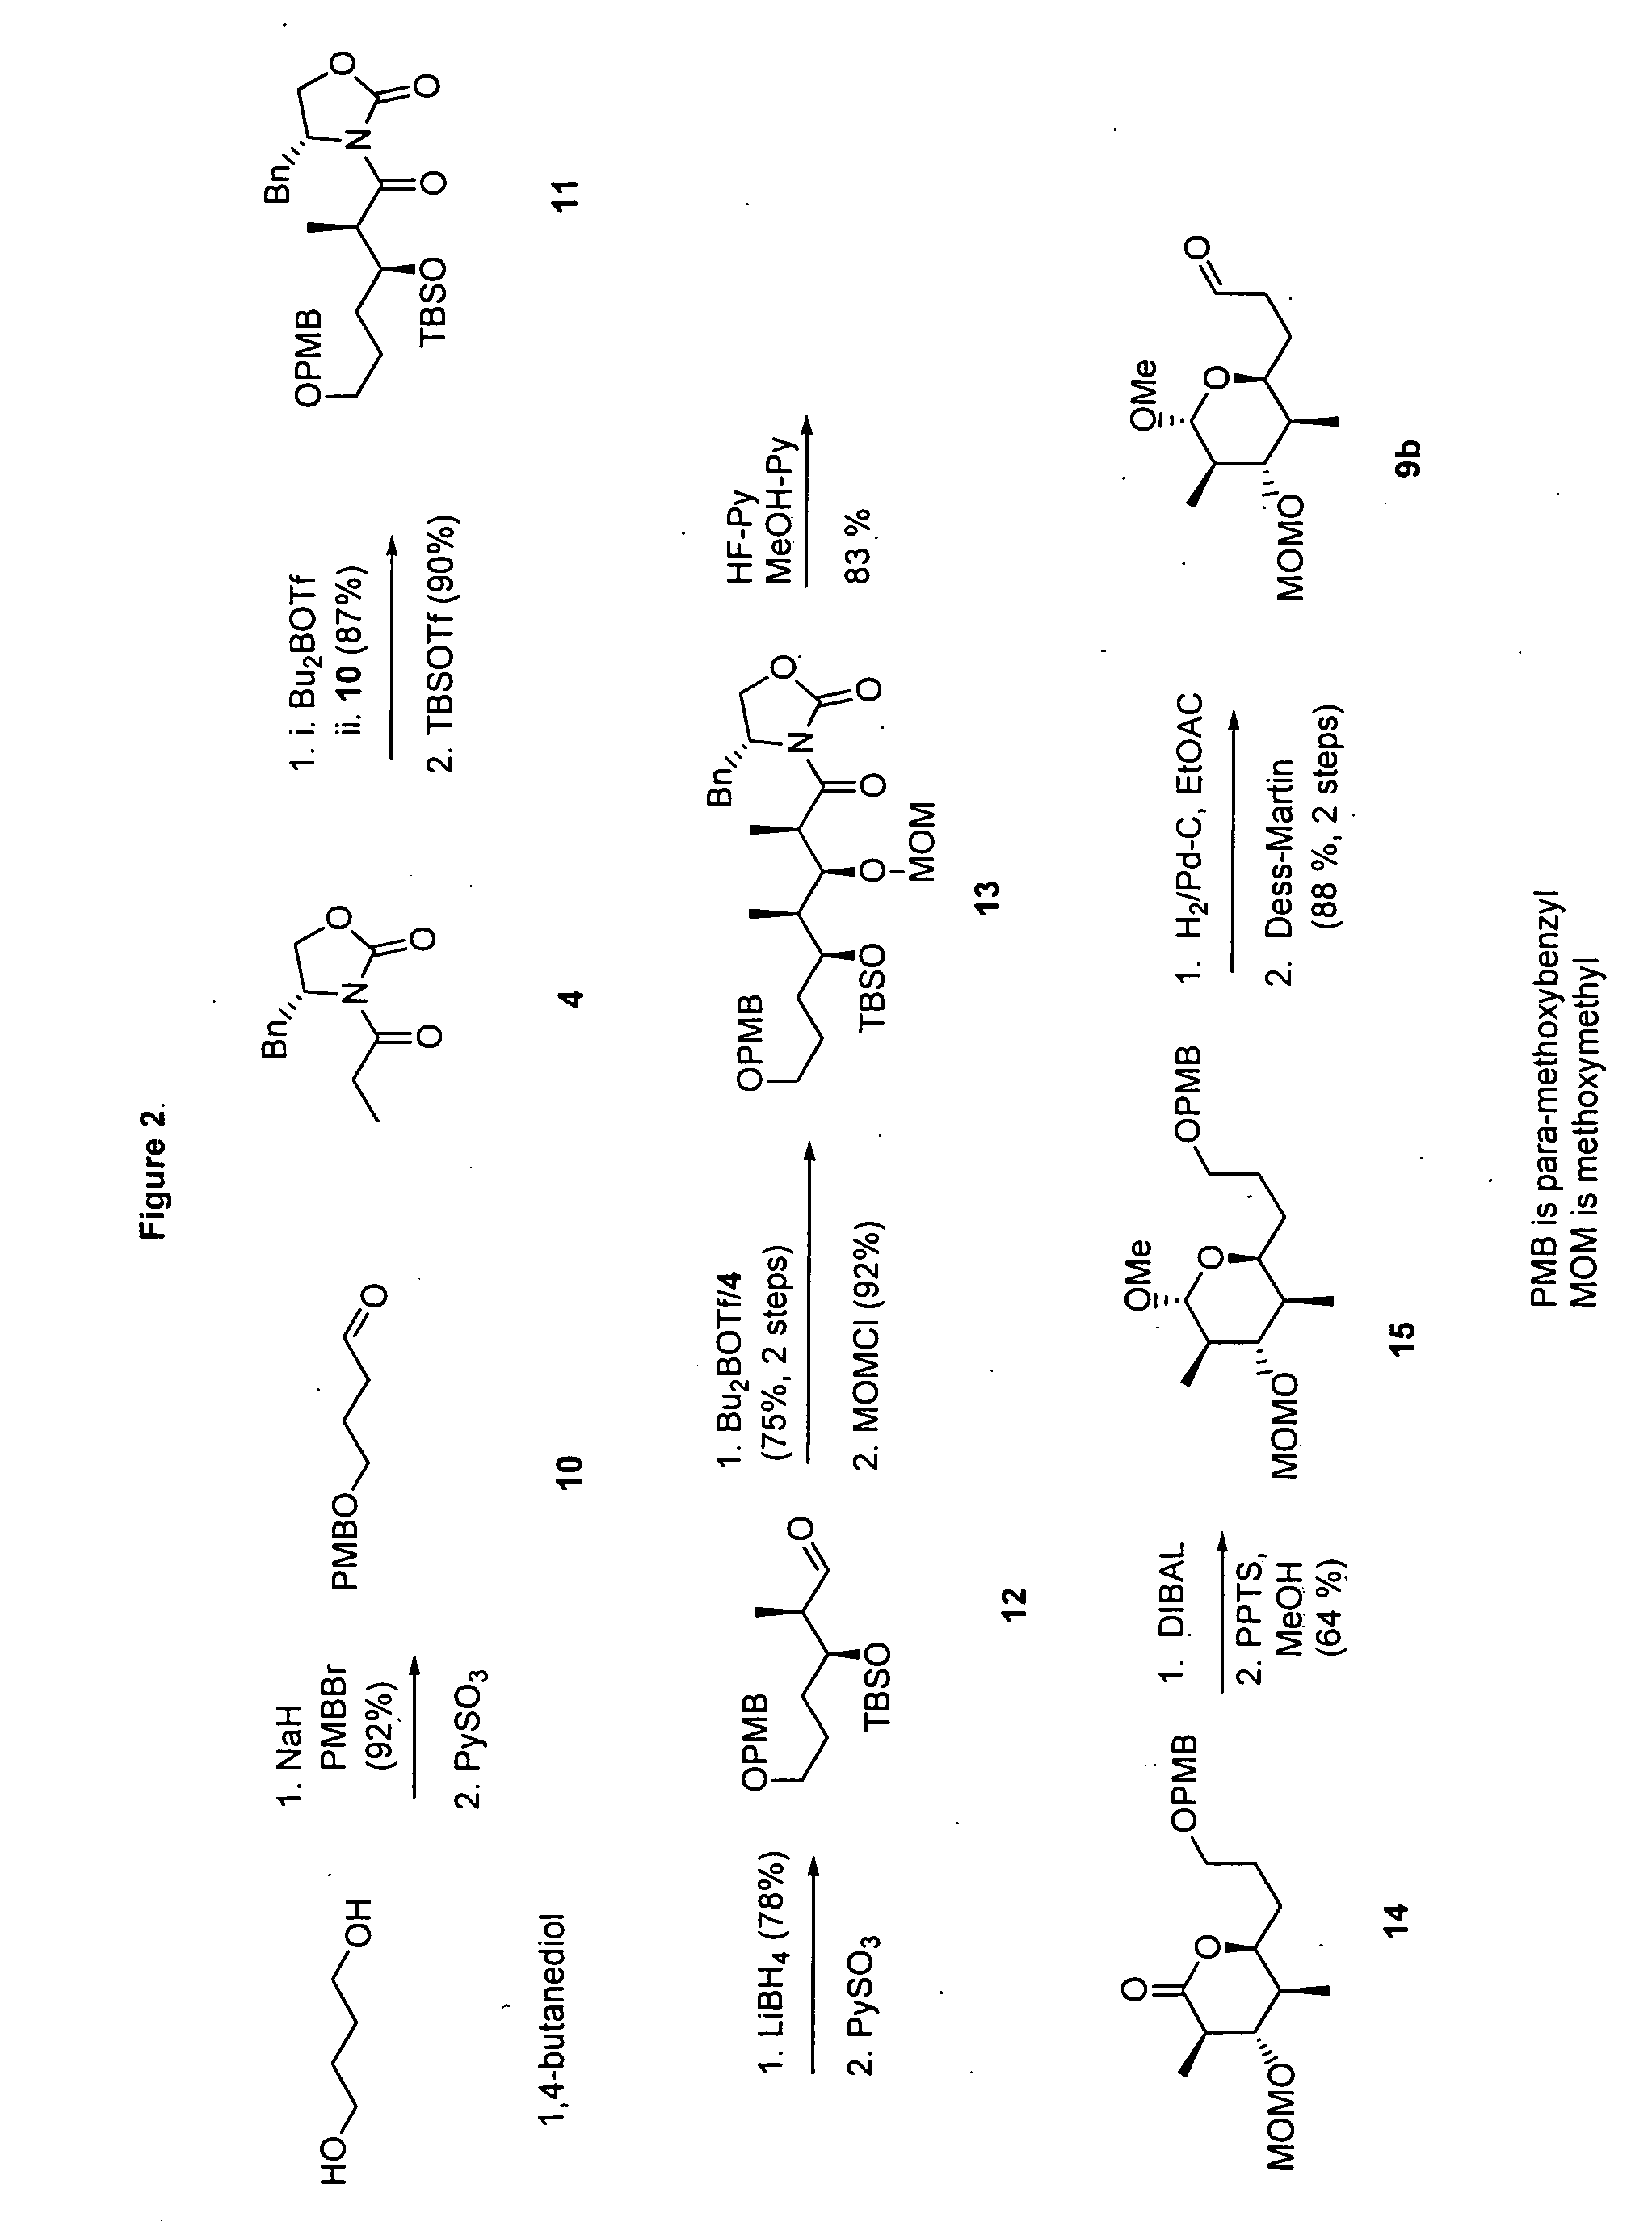 Analogs of discodermolide and dictyostatin-1, intermediates therefor and methods of synthesis thereof